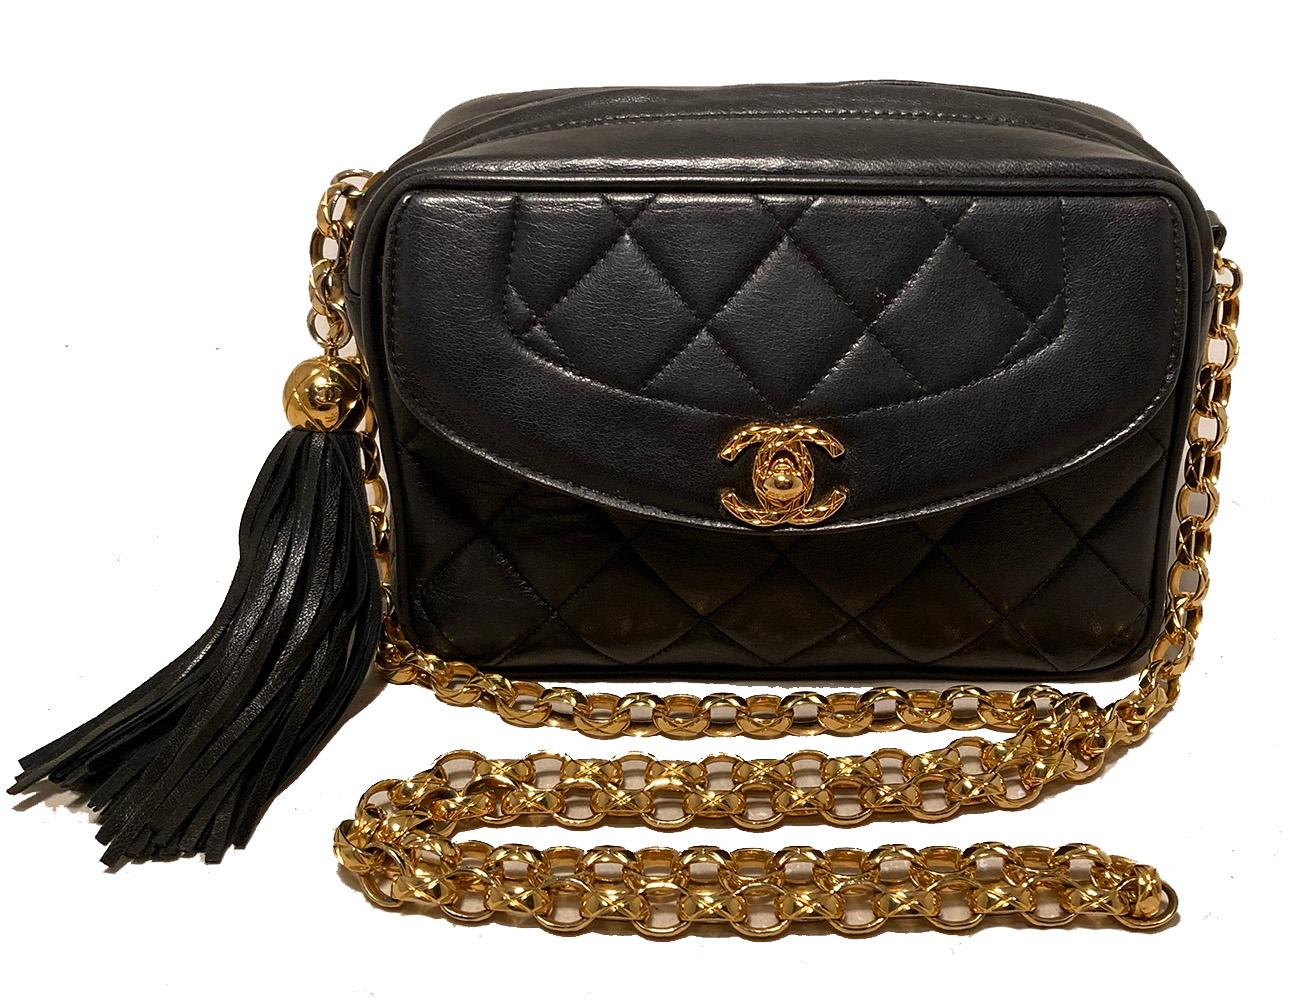 Chanel Vintage Black Leather Tassel Camera Bag in very good condition. Quilted black lambskin leather trimmed with gold hardware. Exterior front flap pocket opens via gold CC logo twist closure. Top zipper opens main compartment which is lined in